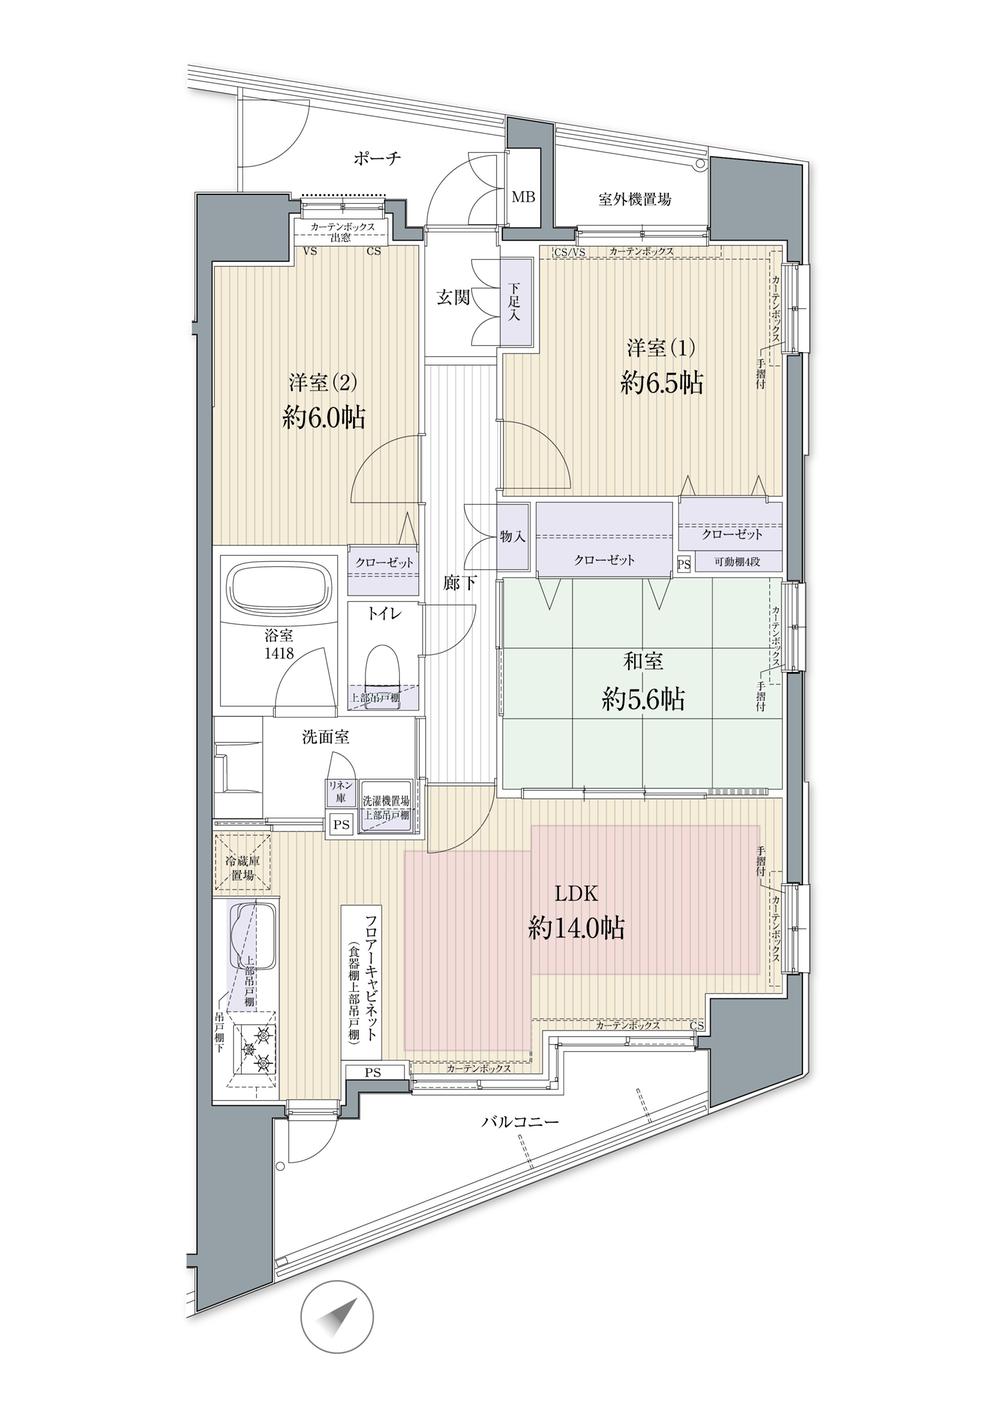 Floor plan. 3LDK, Price 43 million yen, Occupied area 70.74 sq m , Balcony area 9.53 sq m popular counter kitchen, Because of the standard floor plan, Reform will be various thought.